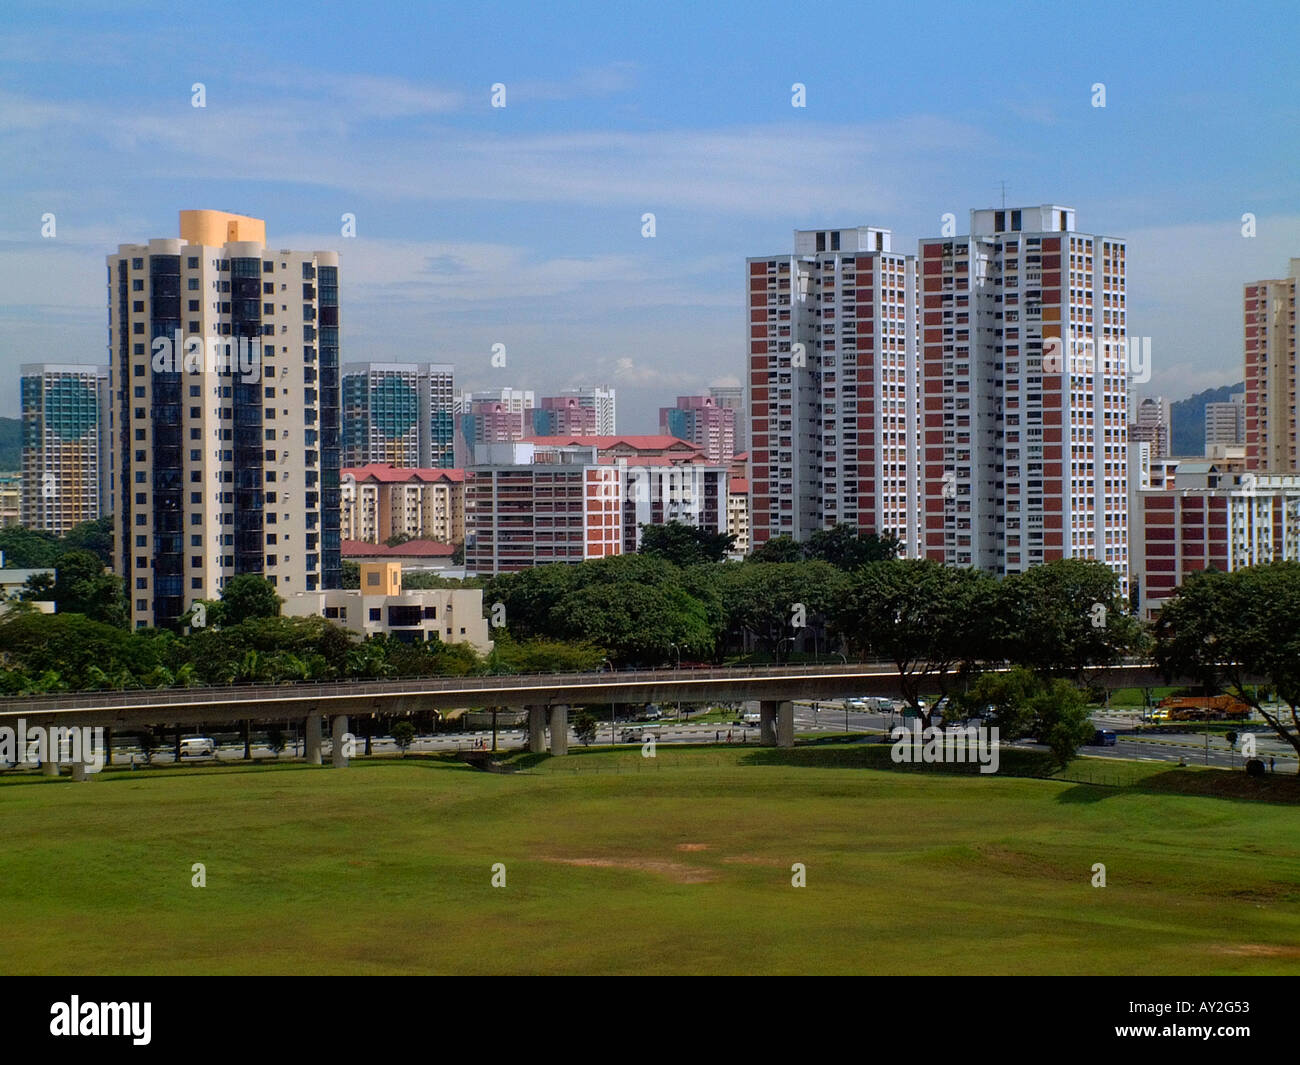 High rise apartment buildings and MRT subway line in Singapore Stock Photo